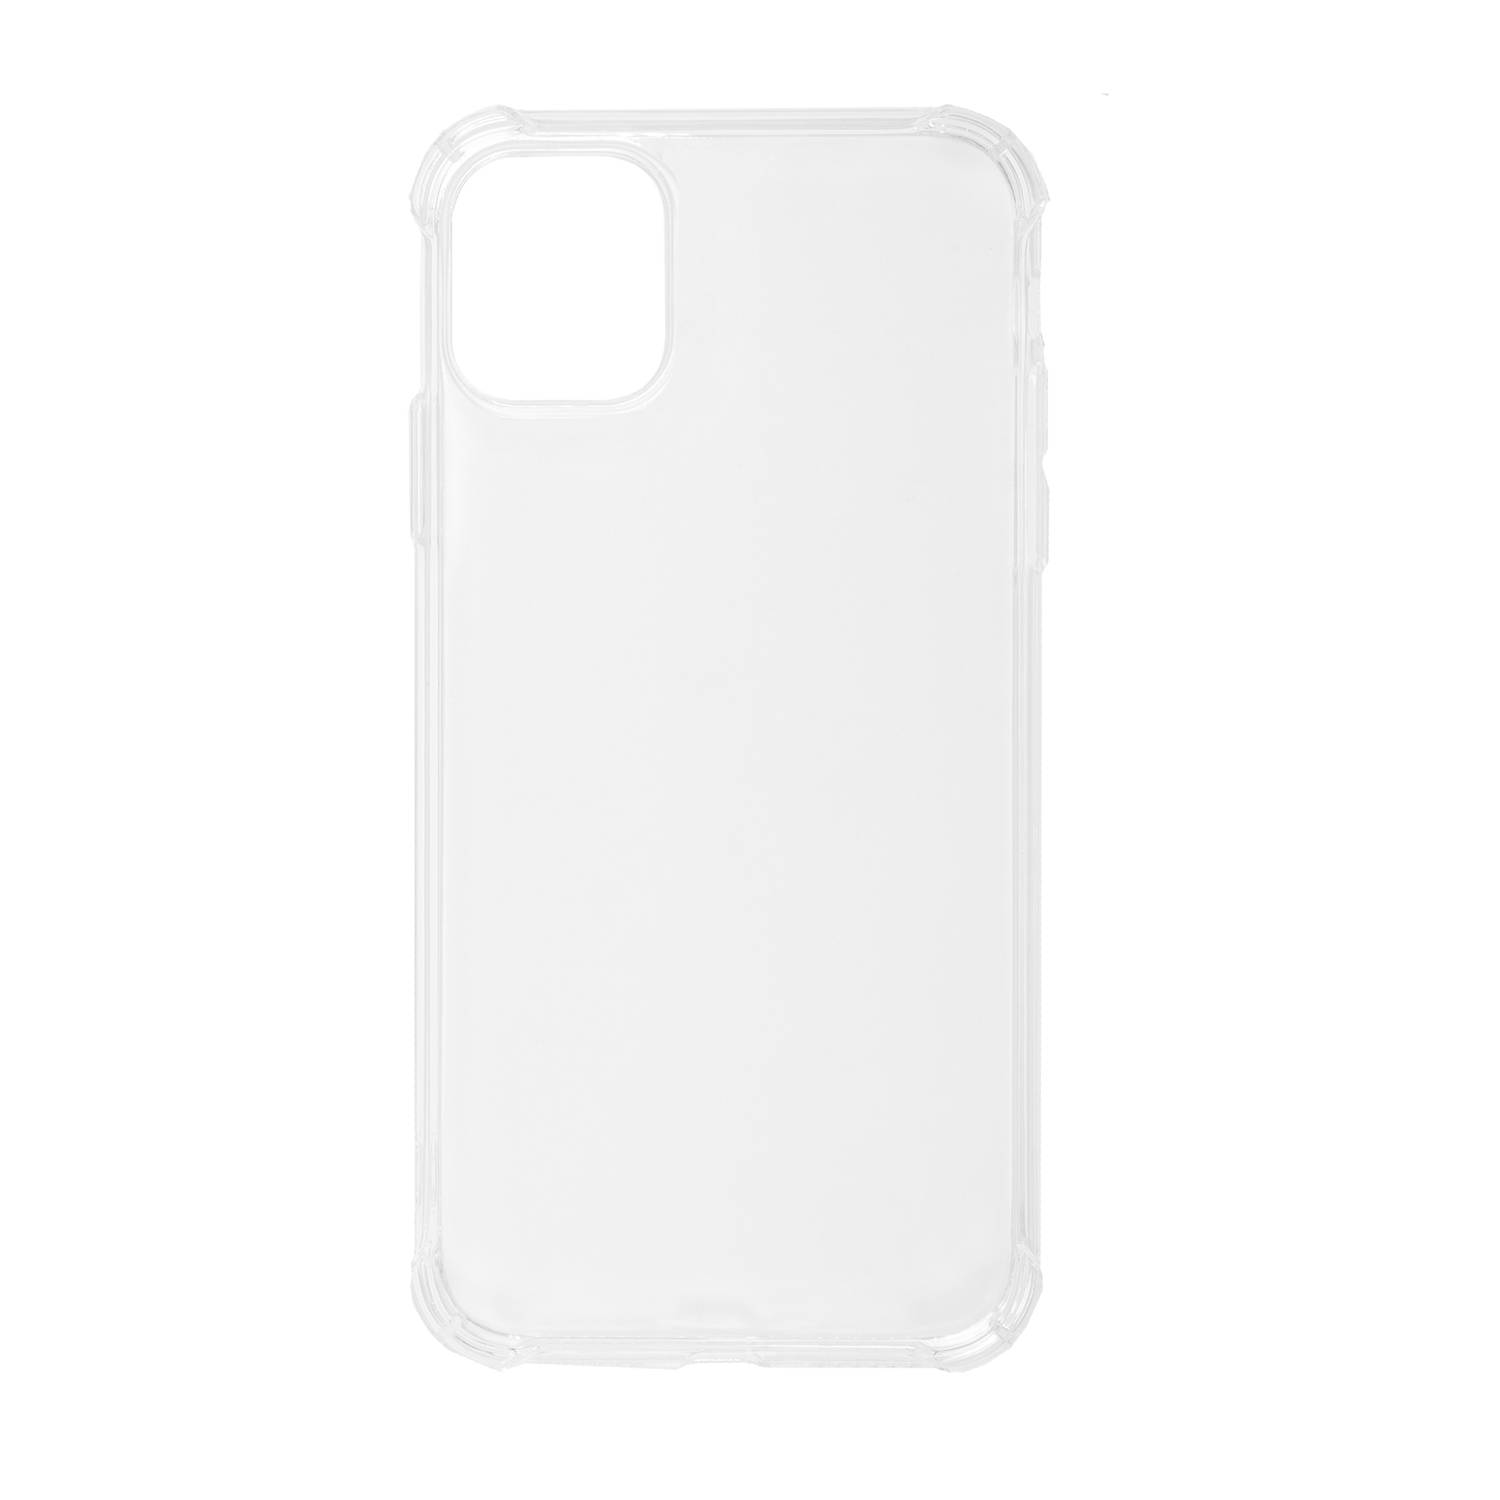 BMAX TPU soft case hoesje voor iPhone 11 Pro - Clear/Transparant